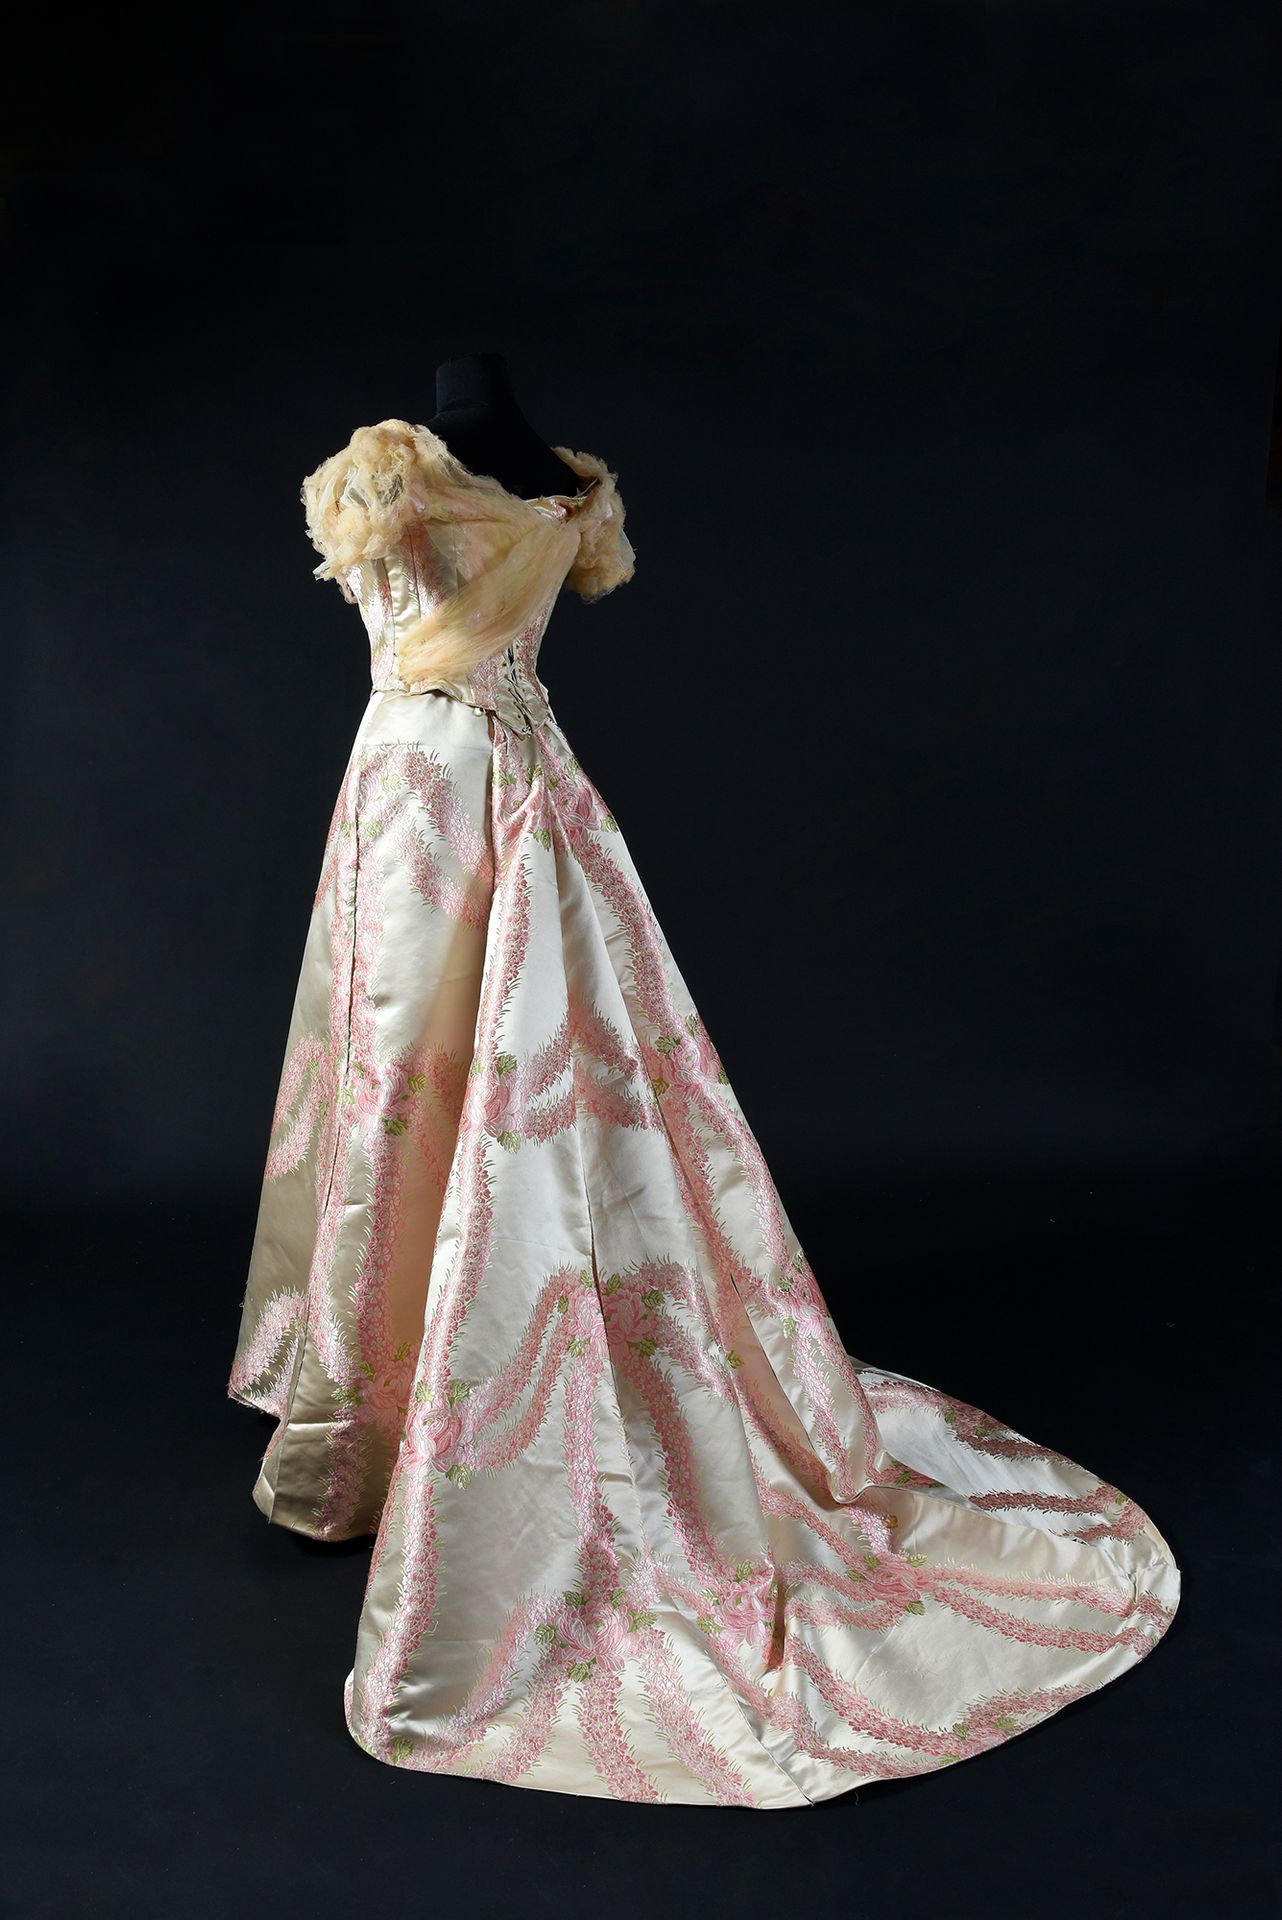 Null Ball gown signed Worth, (illegible claw number) circa 1895, dress in polych&hellip;